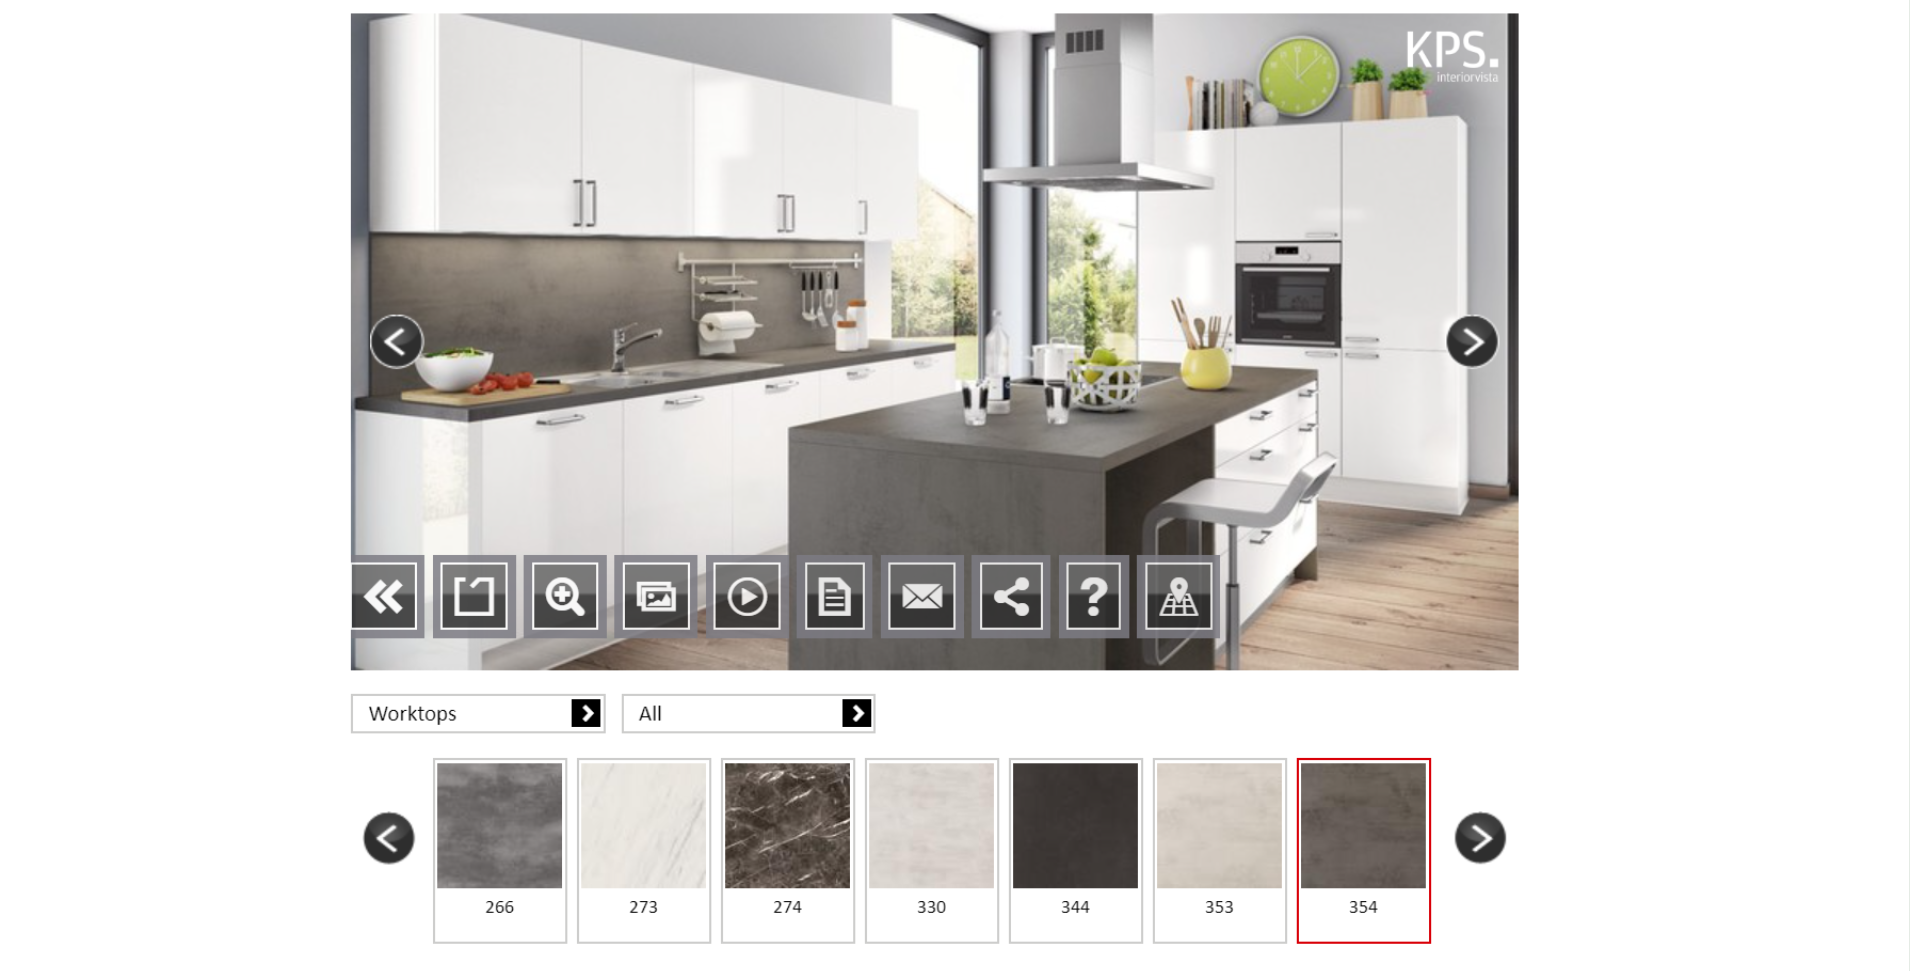 Virtual Kitchen Planning Tools To Help Plan Your Renovation